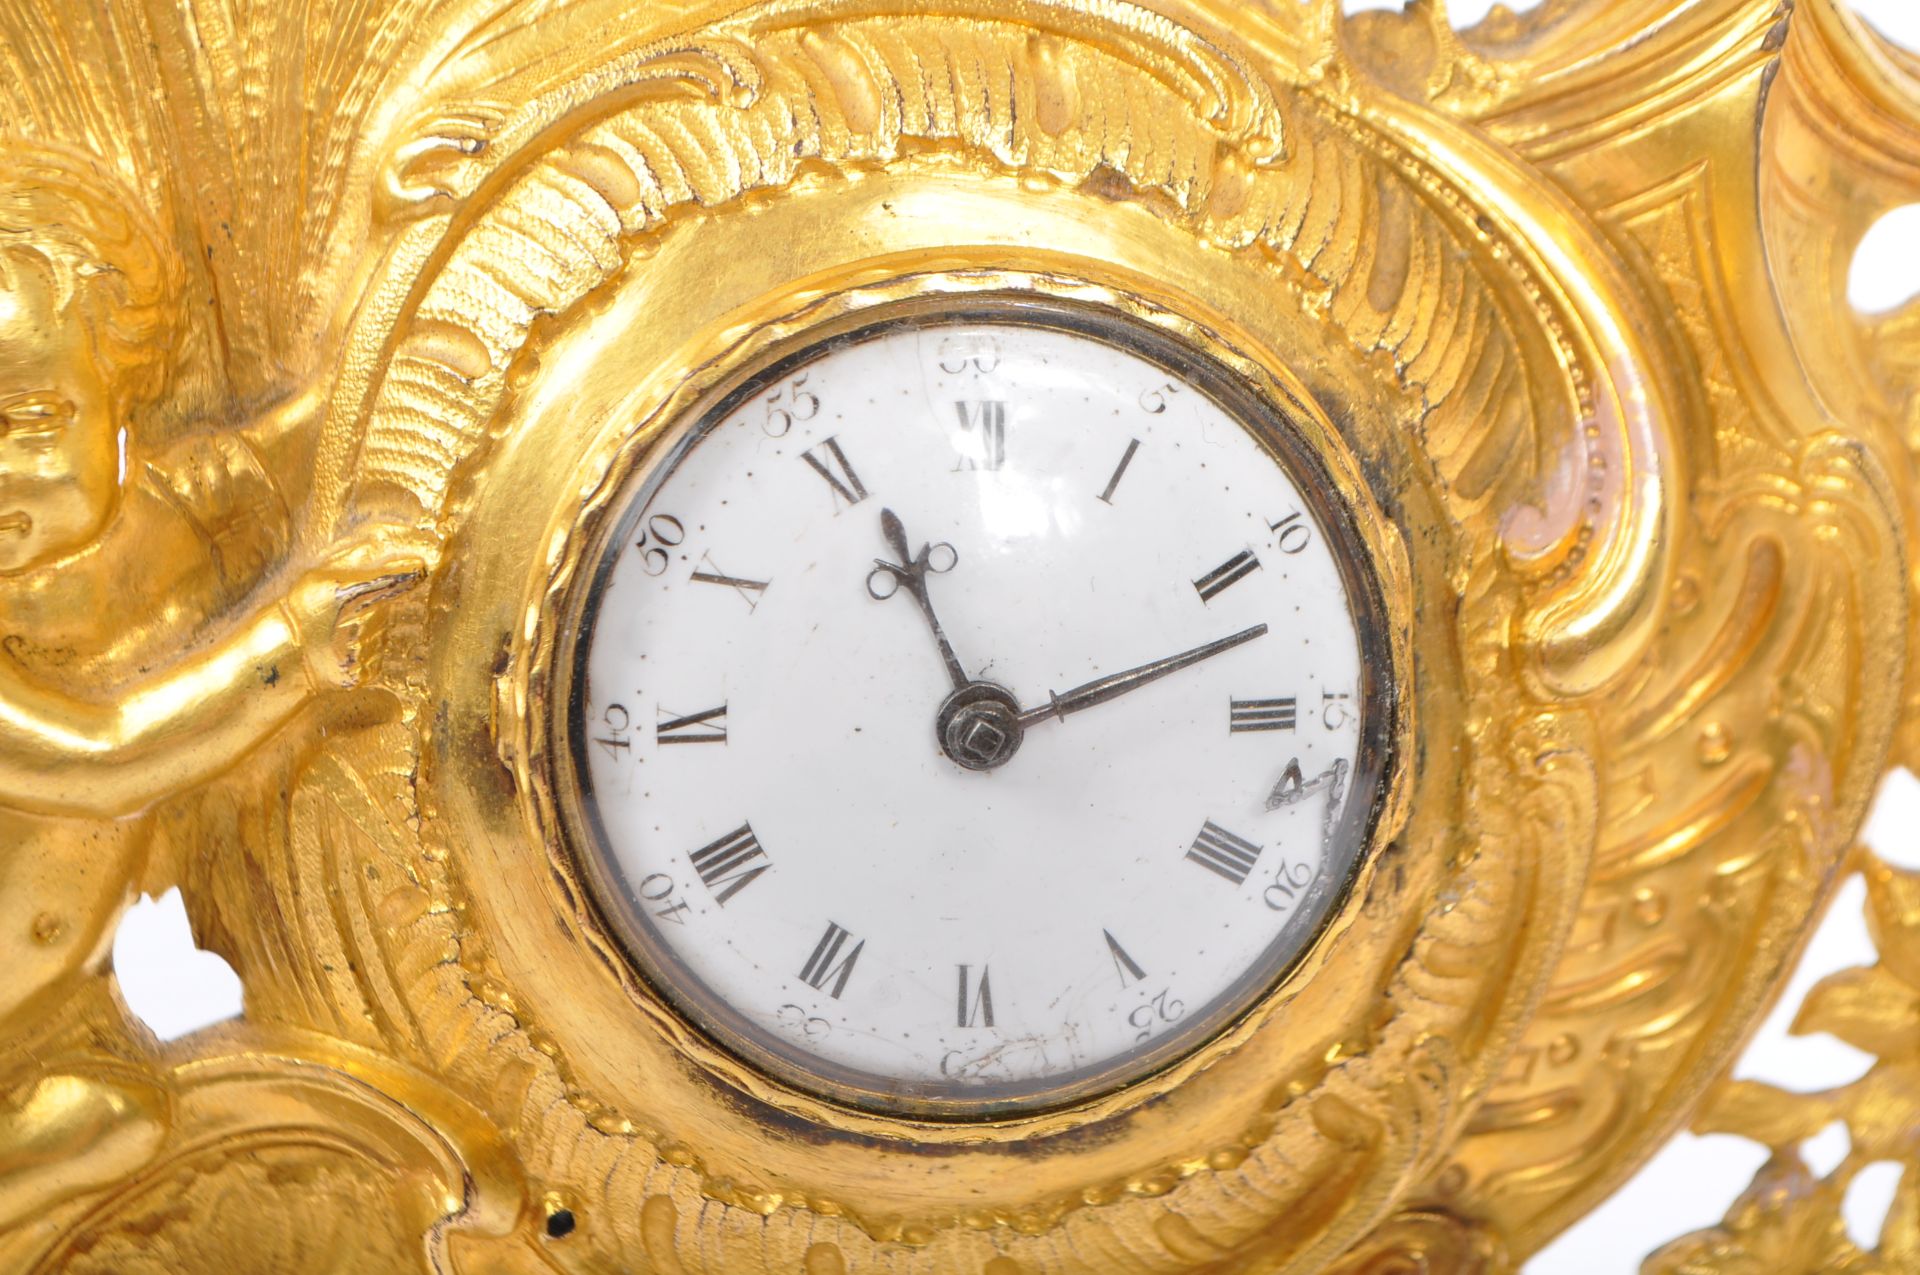 19TH CENTURY FRENCH BELLE EPOQUE ERA GILT CARTEL CLOCK ON STAND - Image 3 of 4